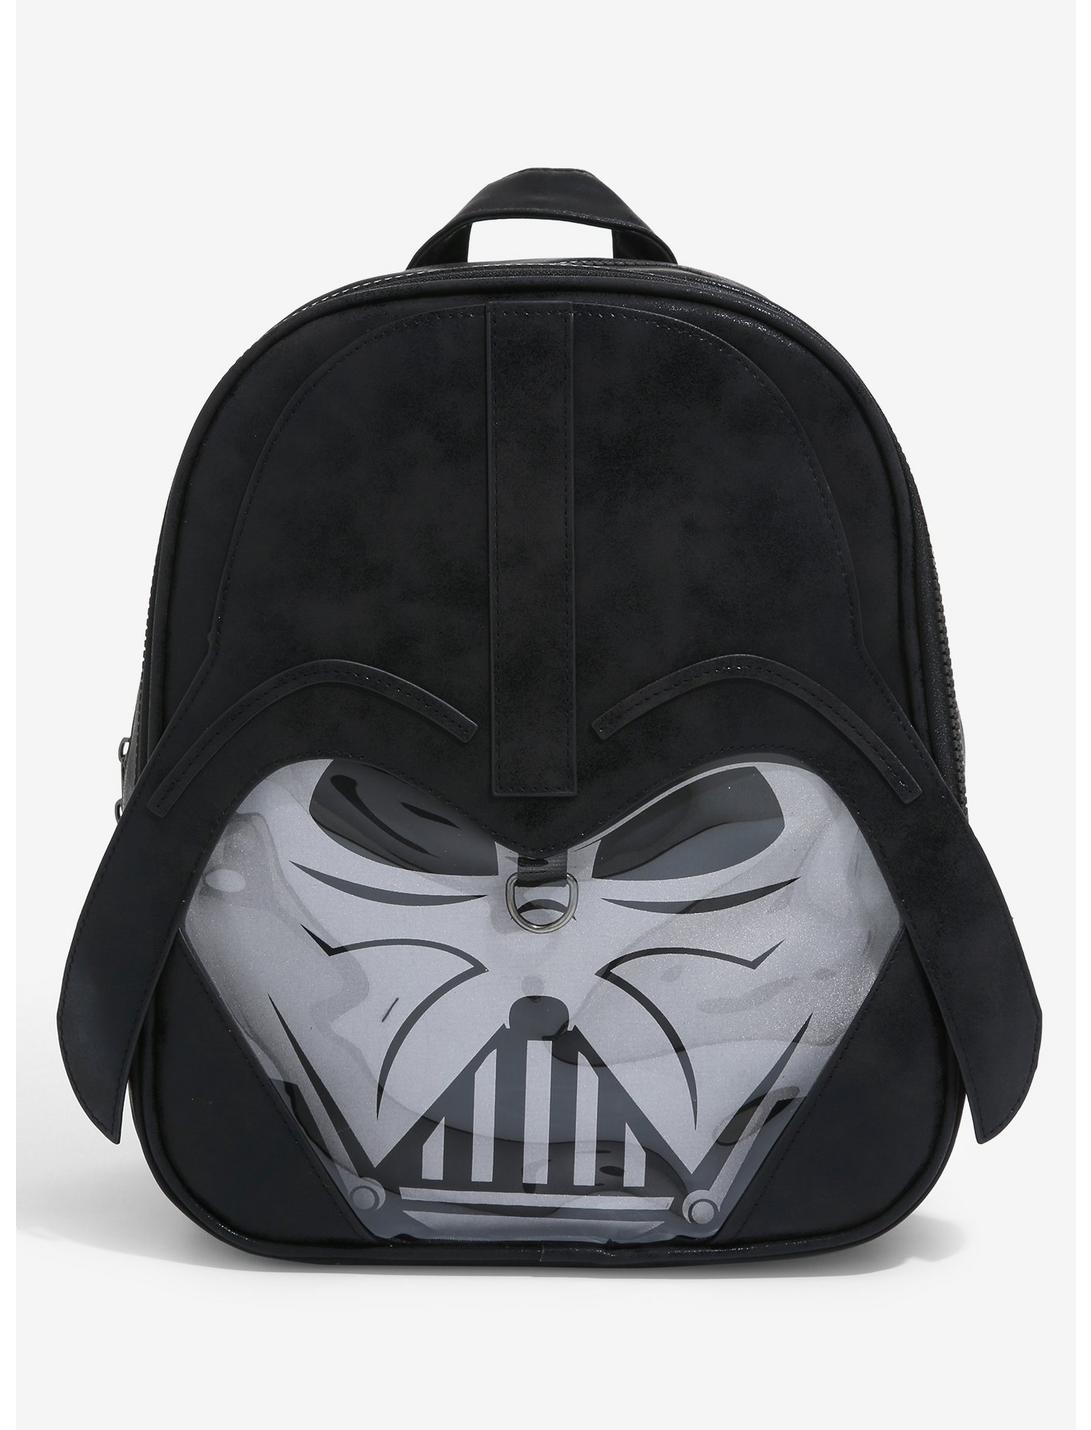 Star Wars X Heroes & Villains Darth Vader Pin Collector Mini Backpack Her Universe Exclusive, , hi-res